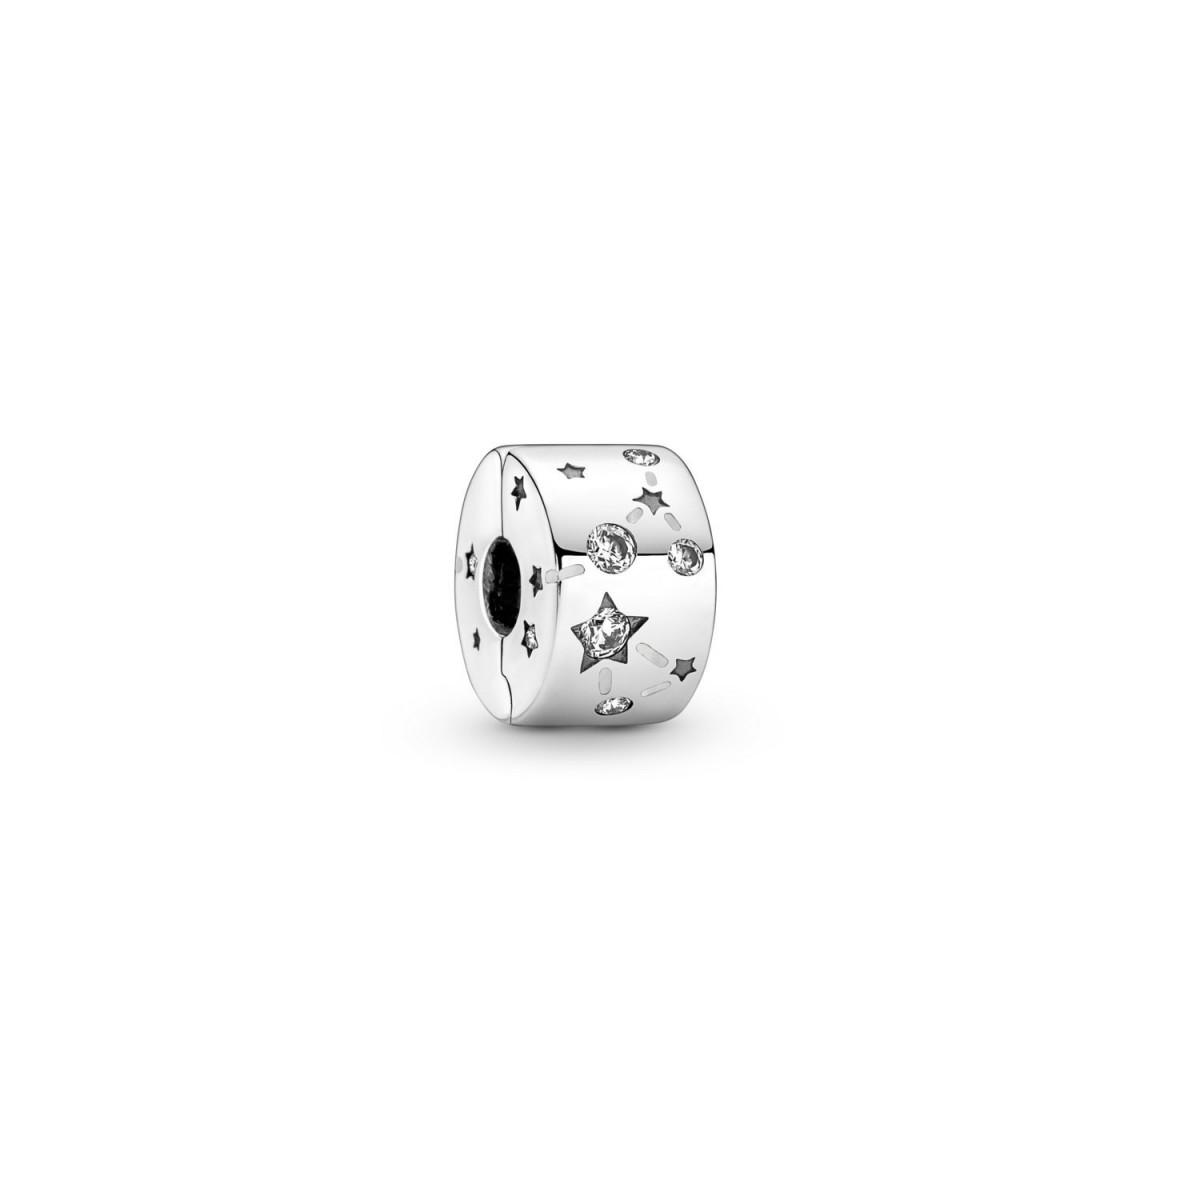 PANDORA CONSTELLATION STERLING SILVER CLIP WITH CLEAR CUBIC ZIRCONIA AND SHIMMERING SILVER WHITE ENAMEL - 790010C01